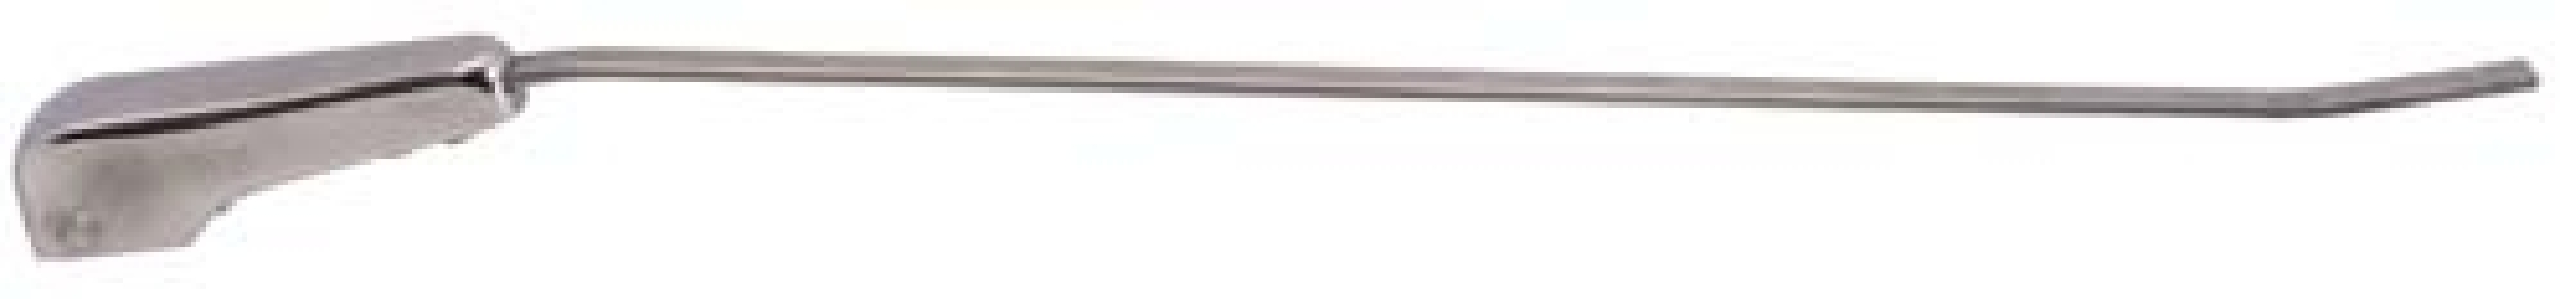 Wiper arm, T2  65 Polished Stainless Steel, Each